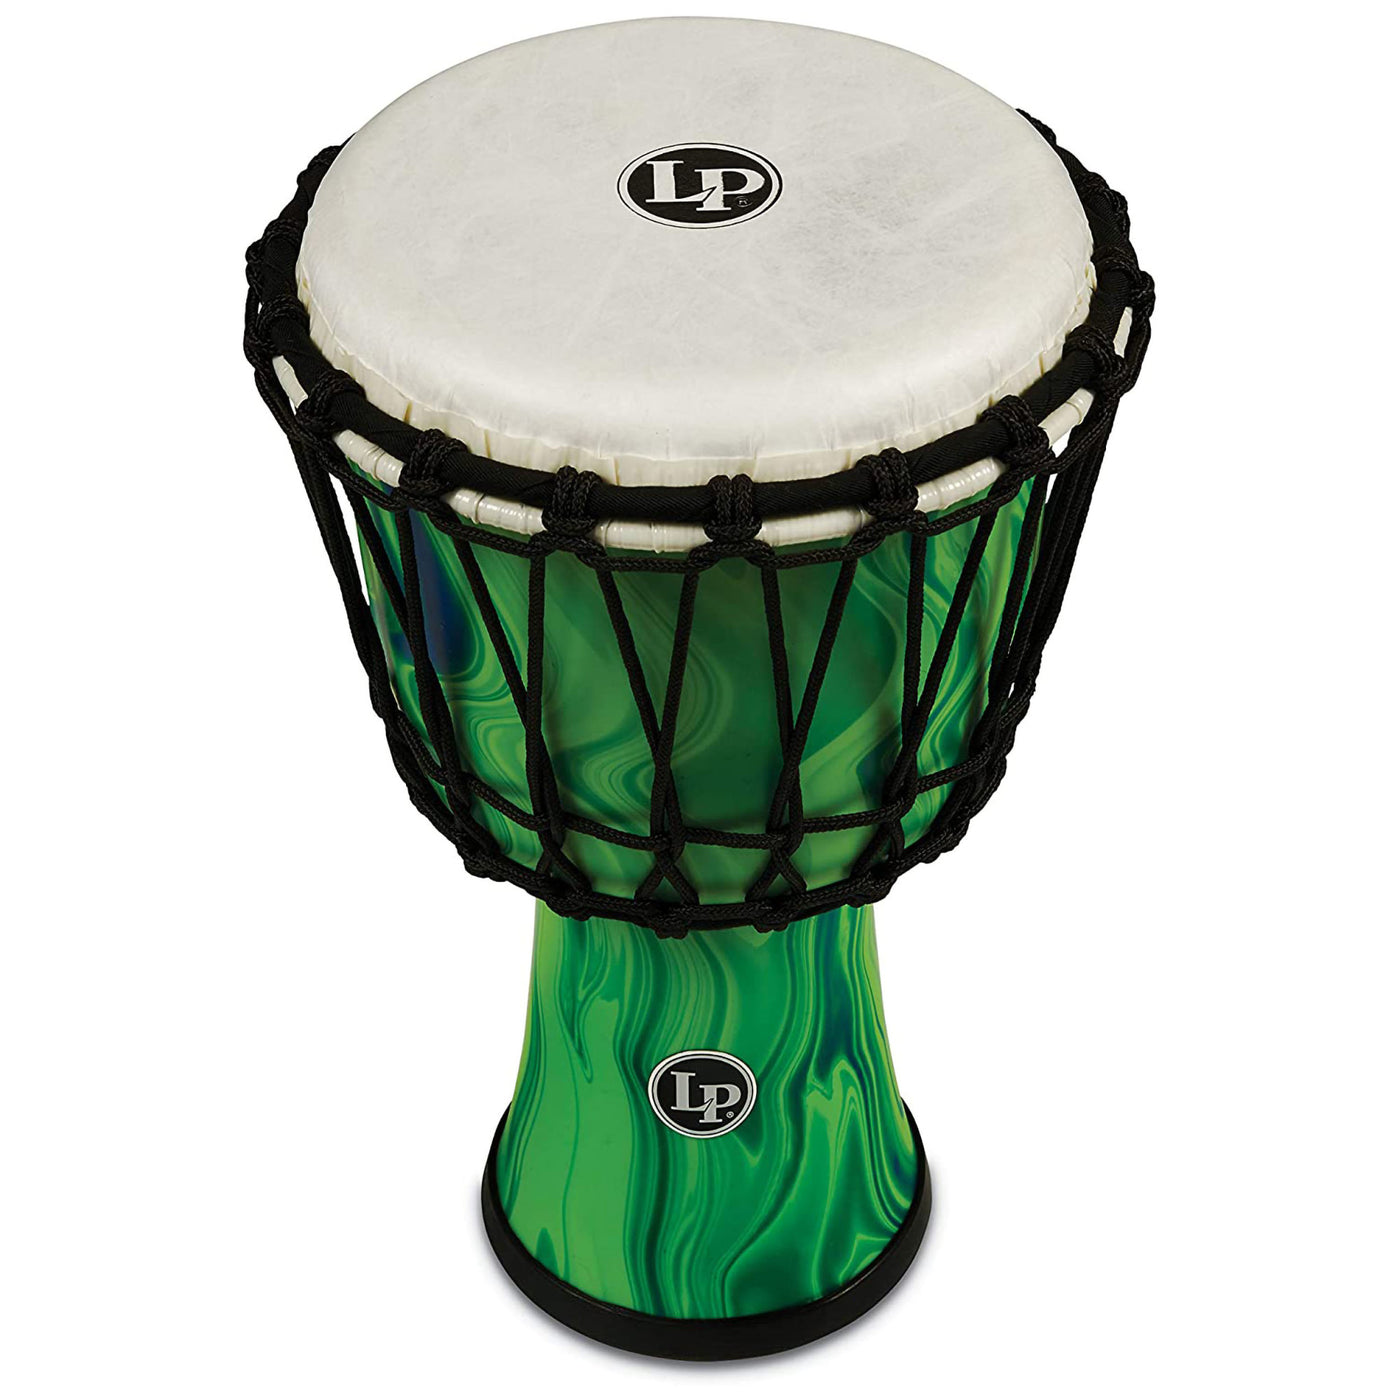 LP World Collection Rope Circle Djembe, 7", Green Marble